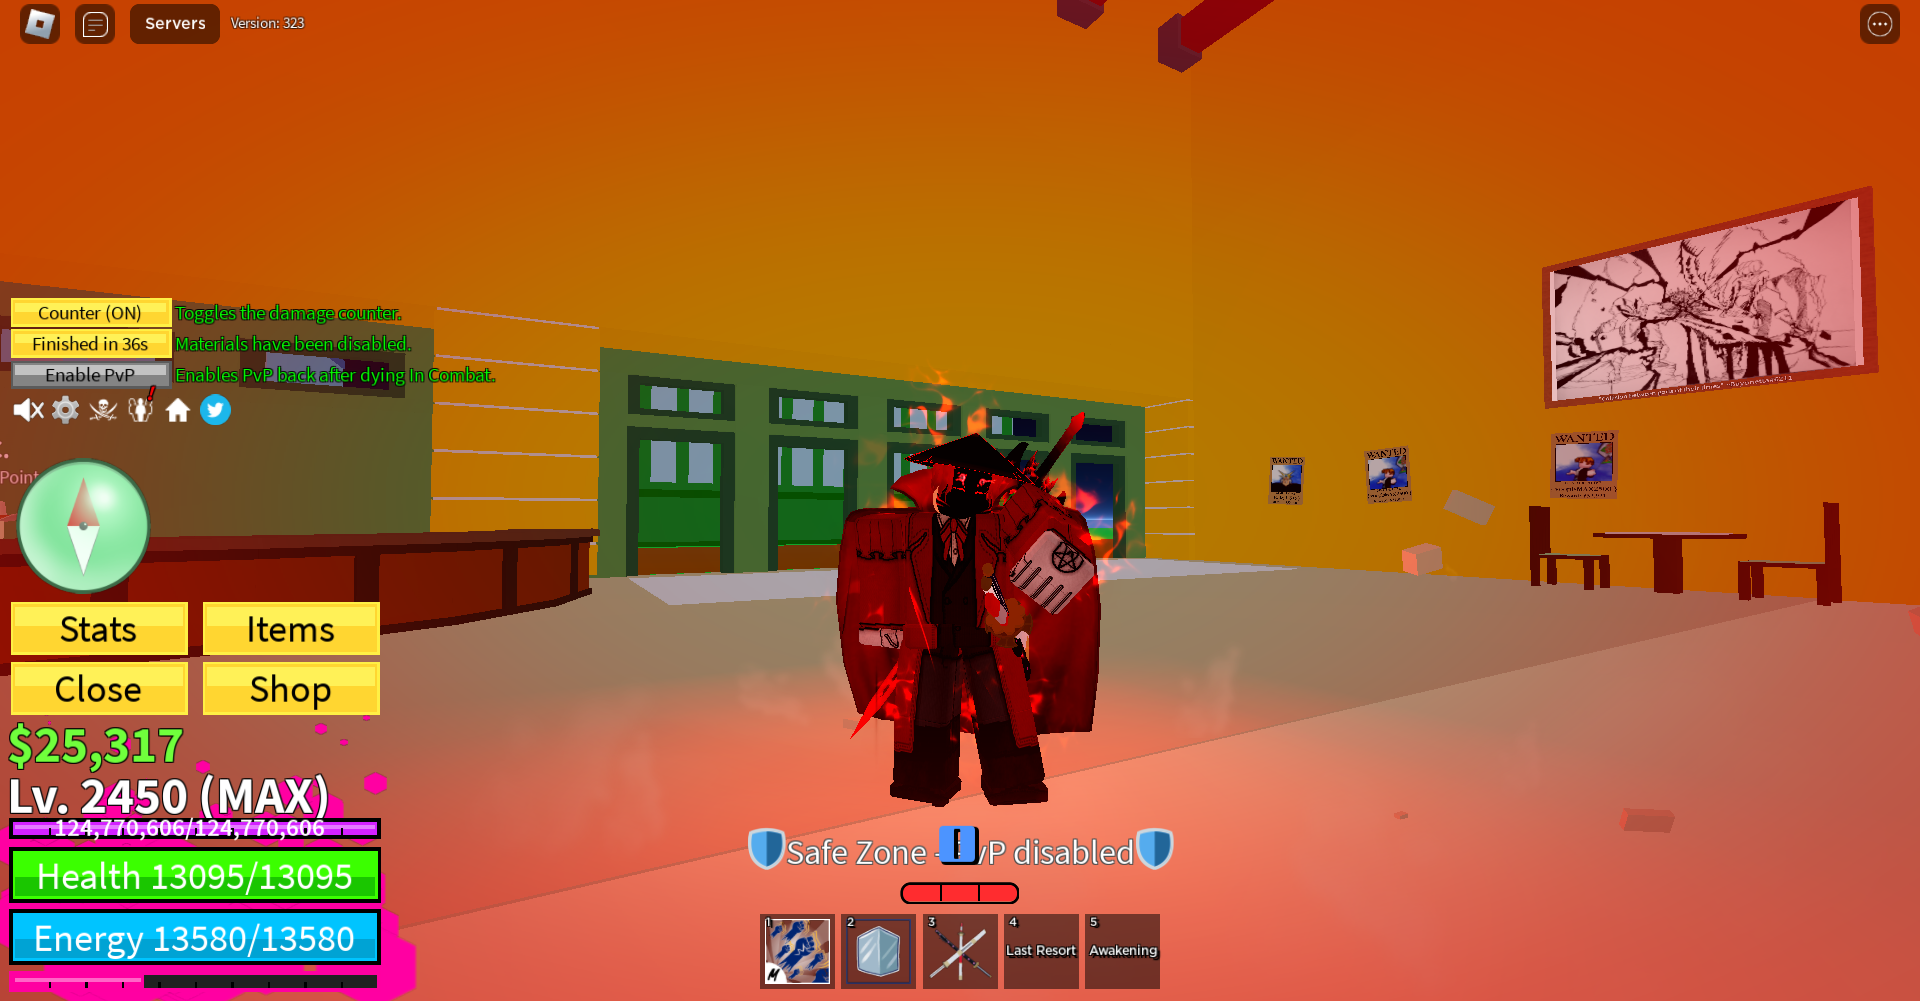 Human V4 is the STRONGEST Awakening in Blox Fruits